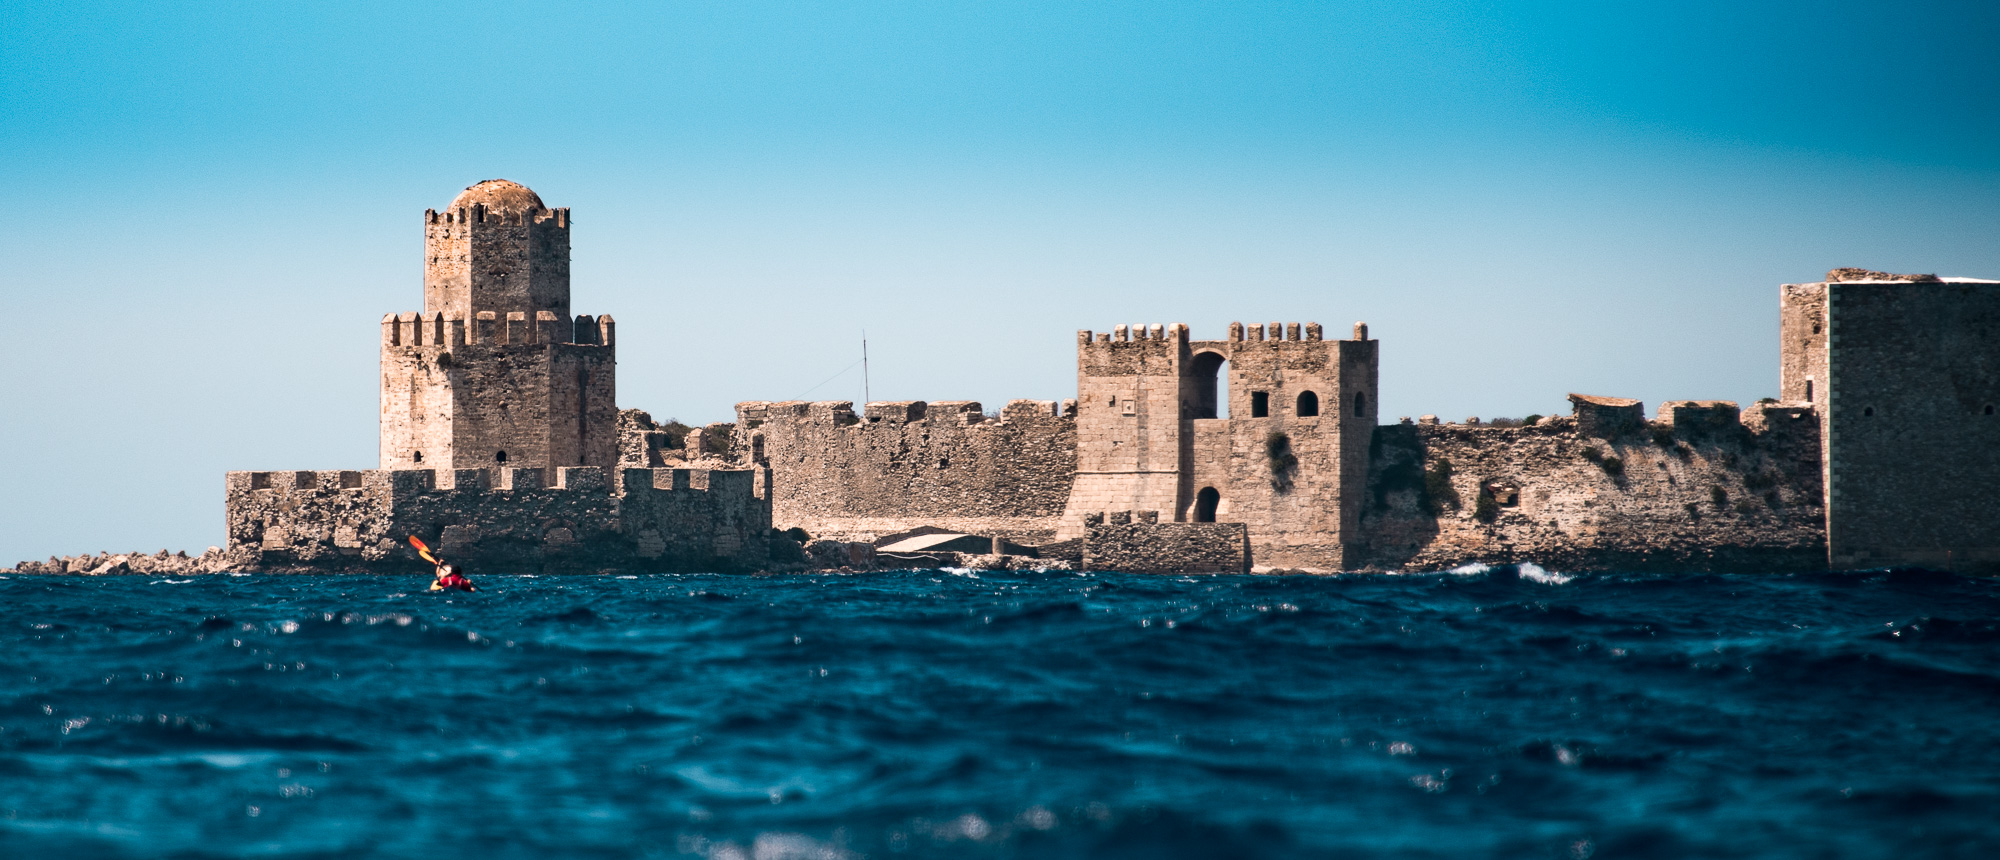 Castle of Methoni view when paddling